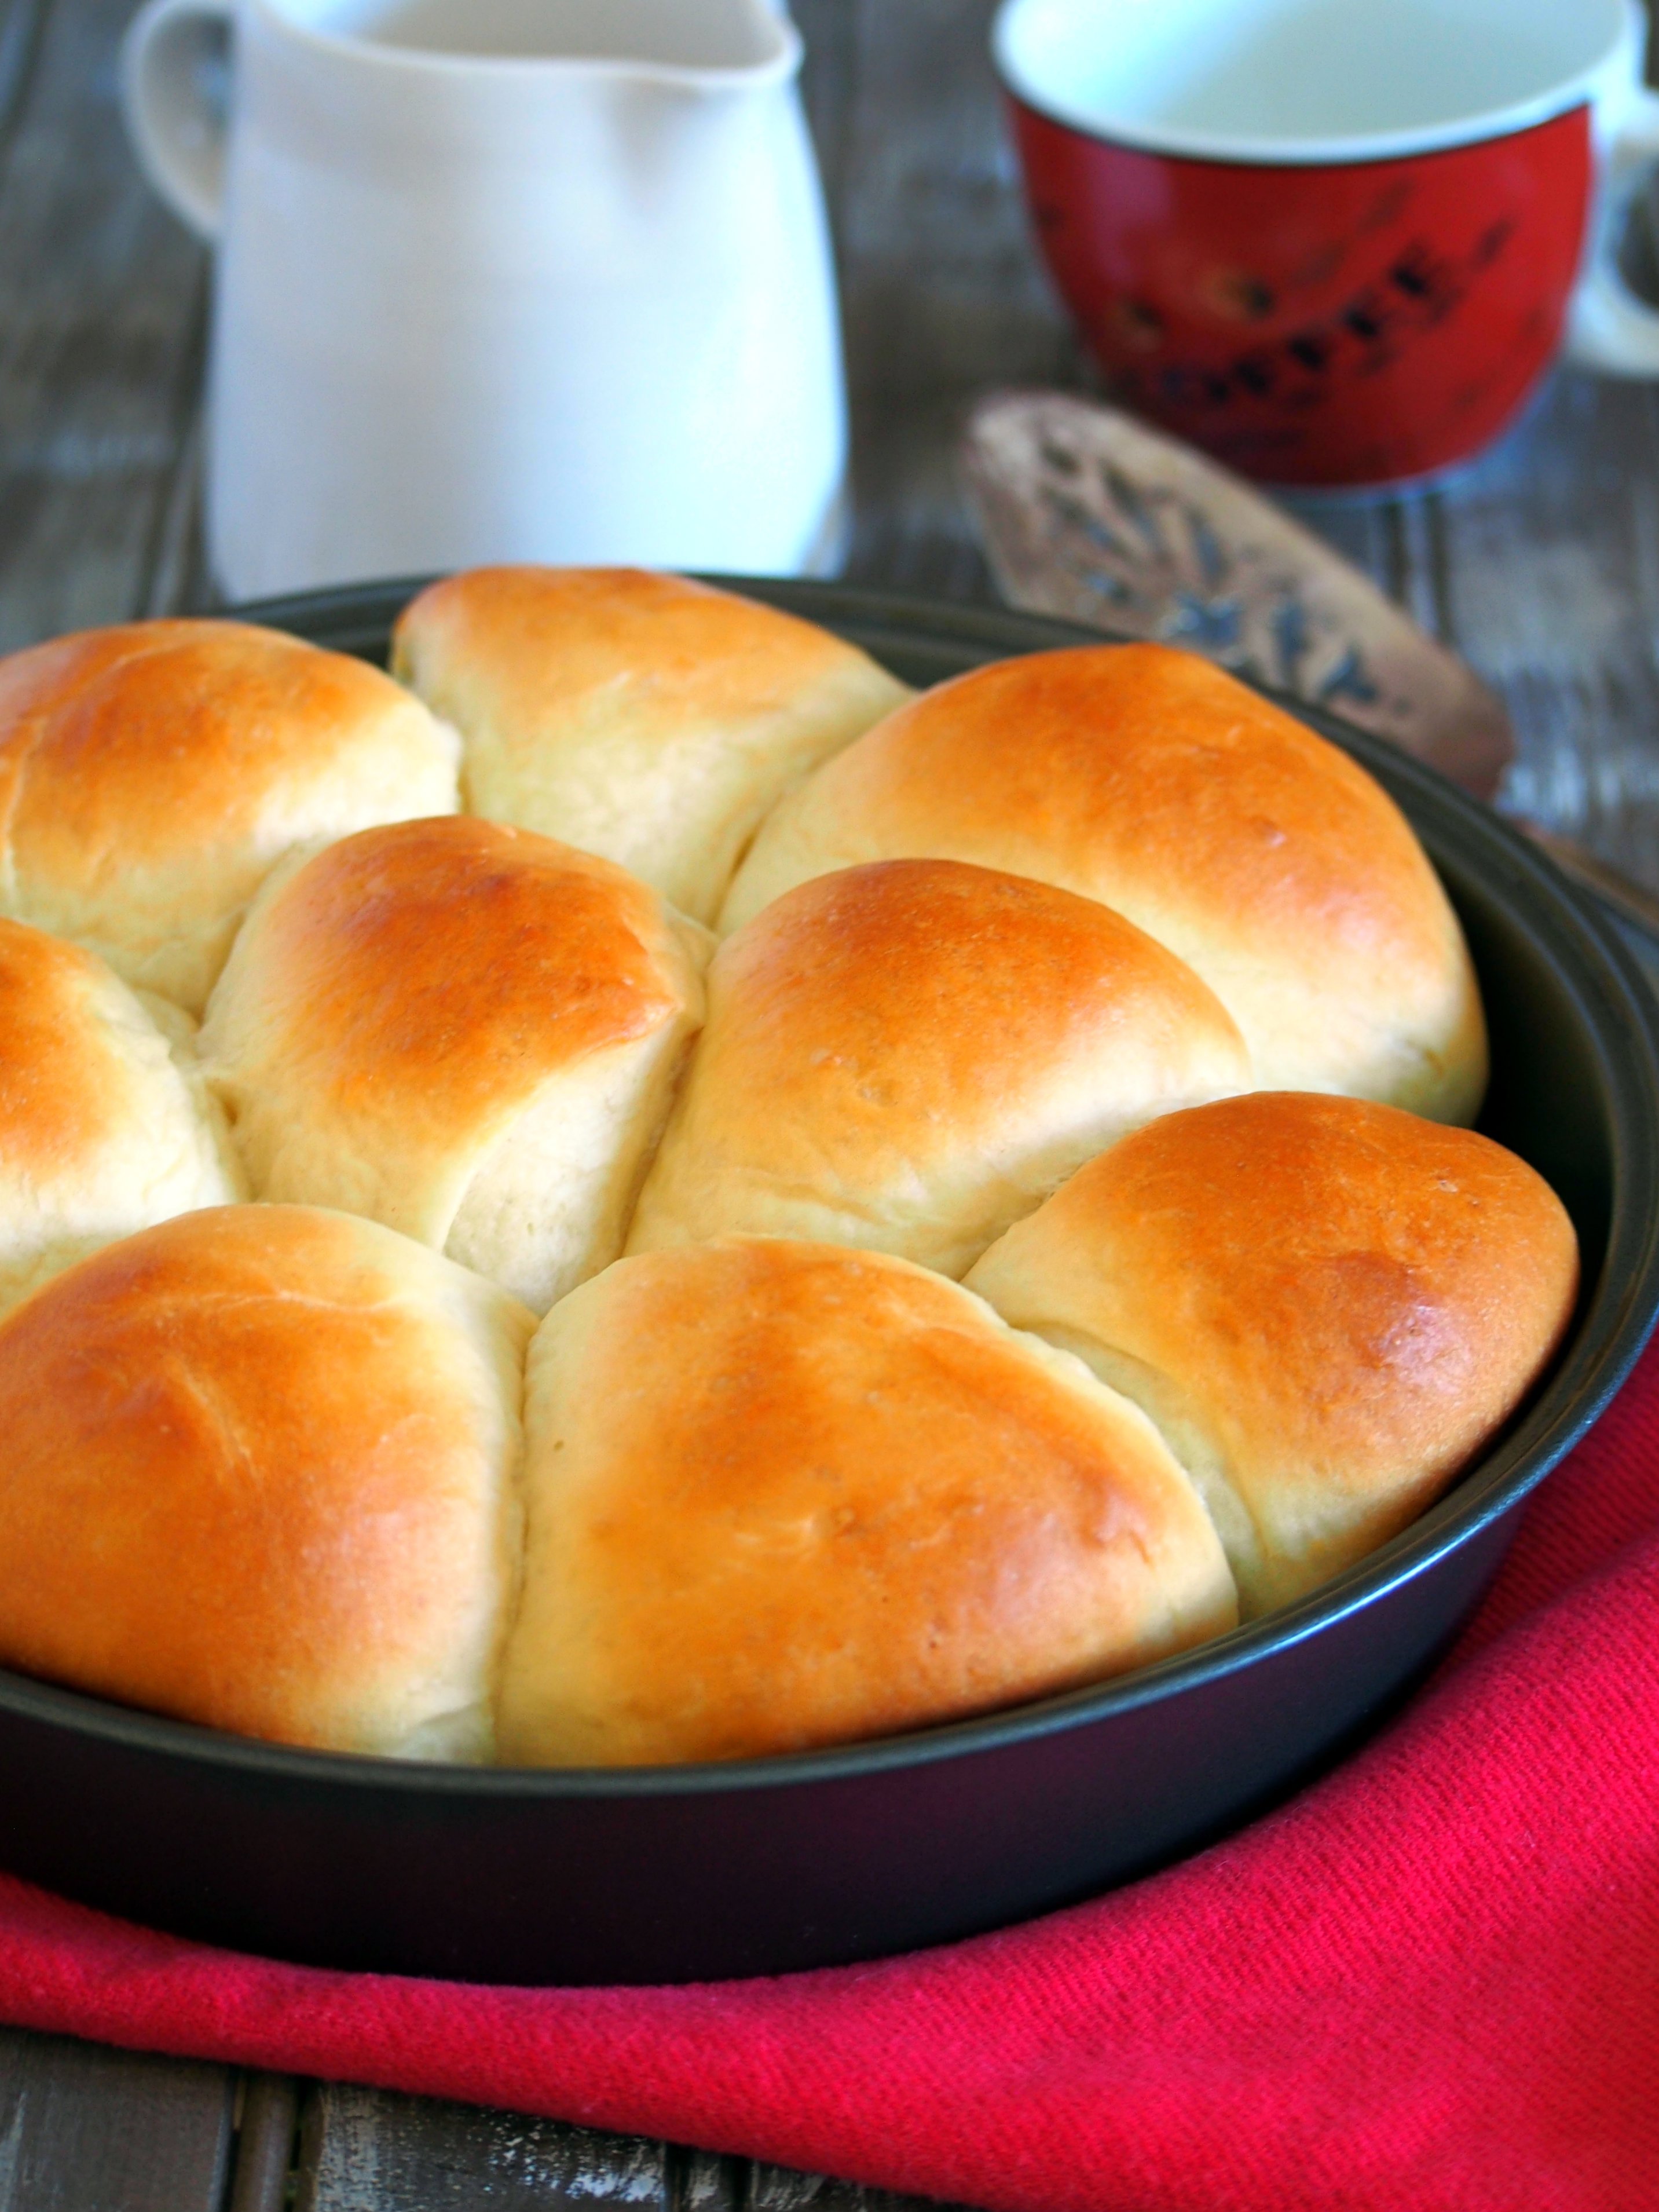 Japanese Milk Buns are soft and tasty dinner rolls perfect for eating on their own or with a pat of butter.